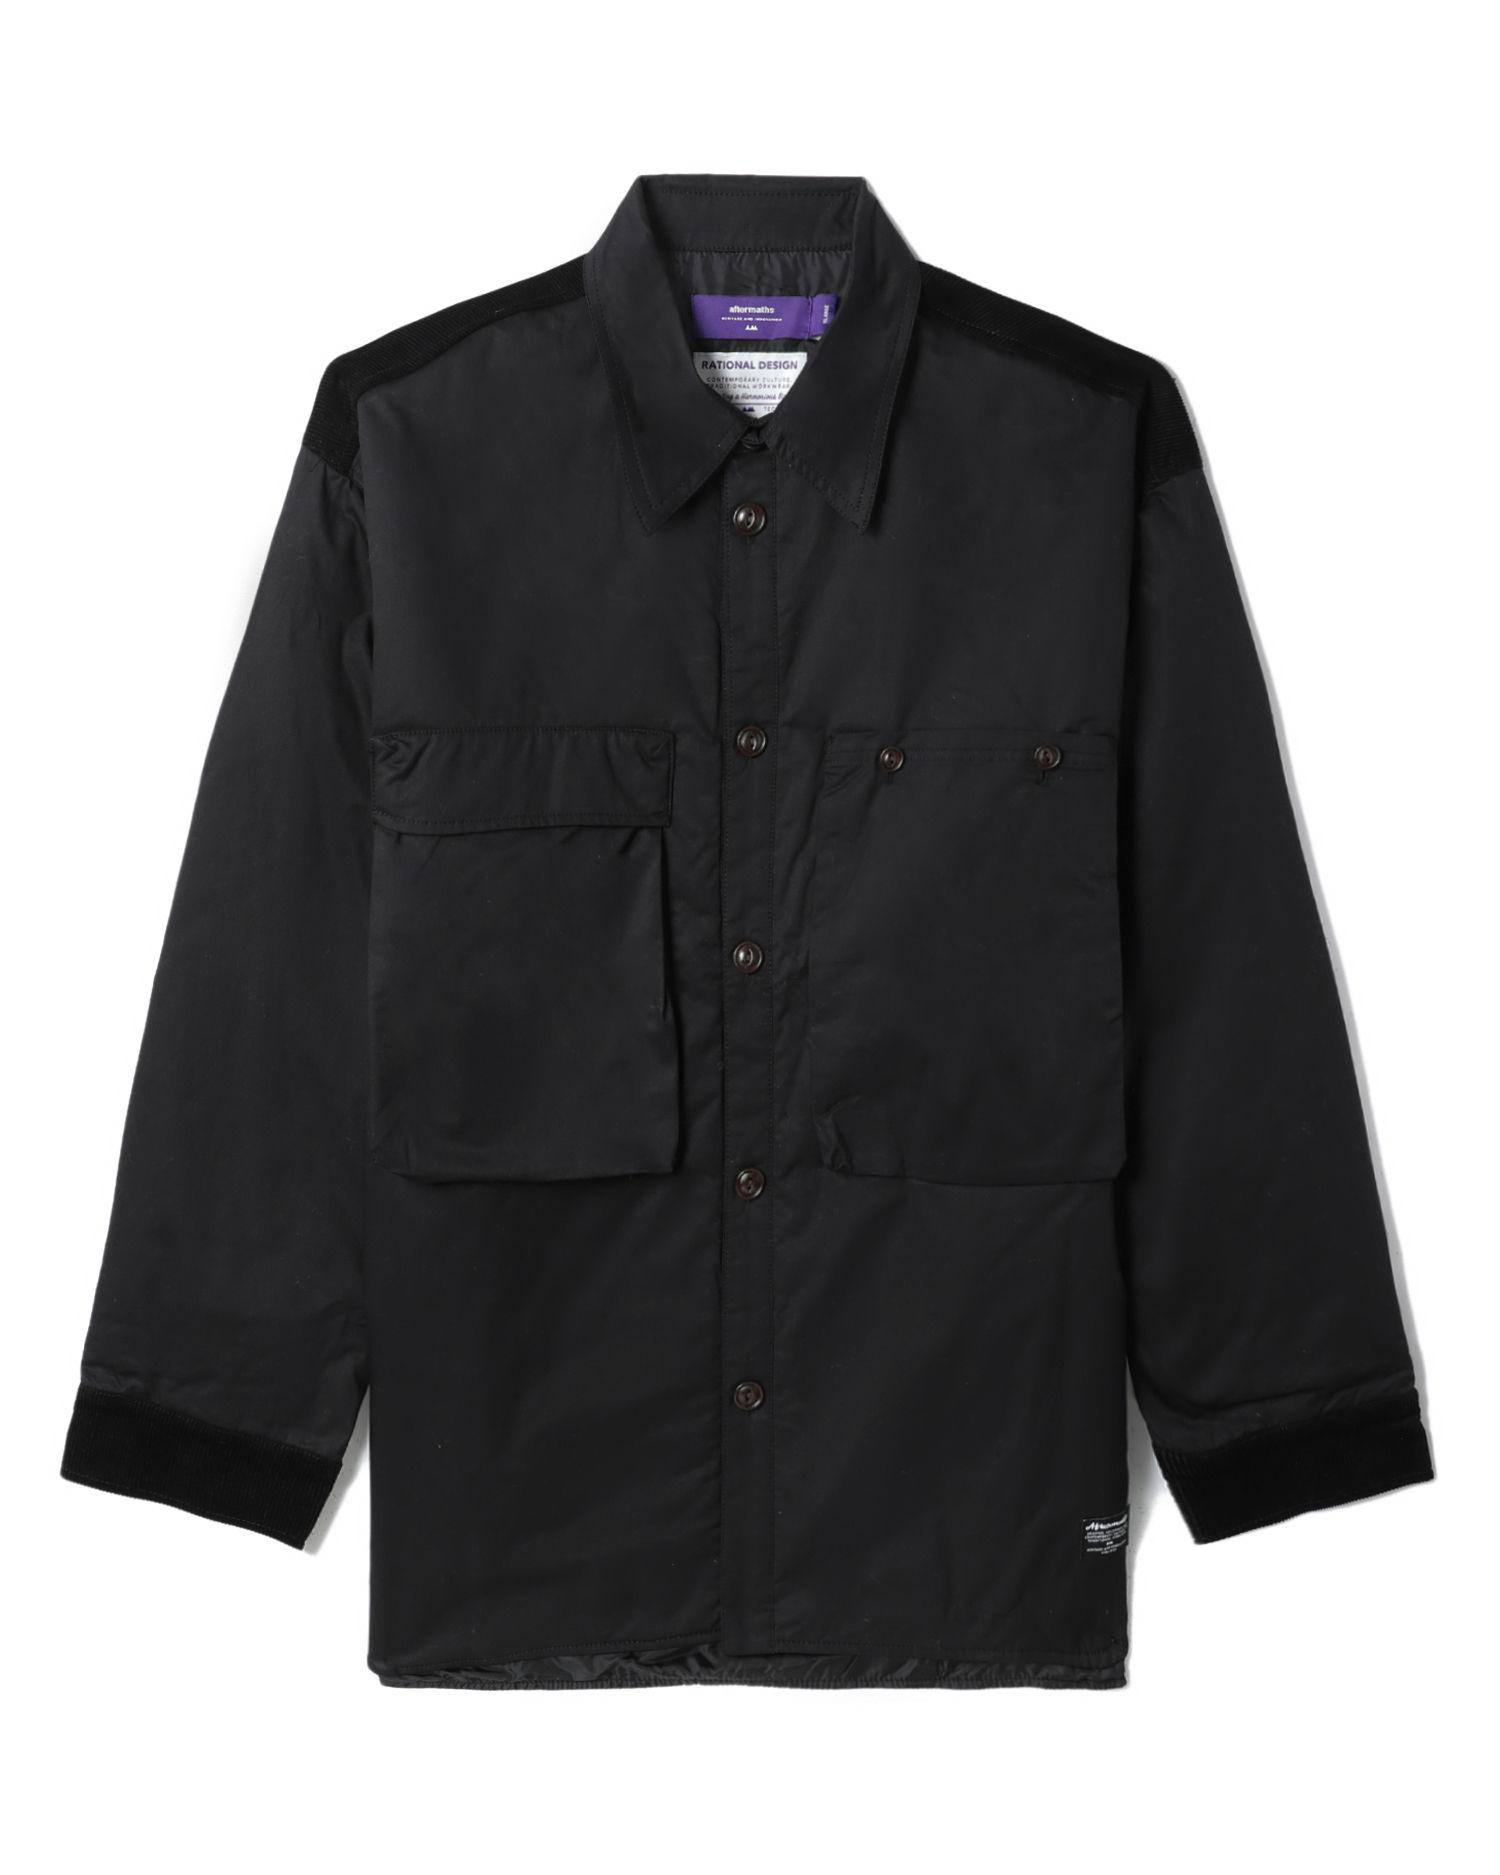 Utility long sleeve shirt by AFTERMATHS